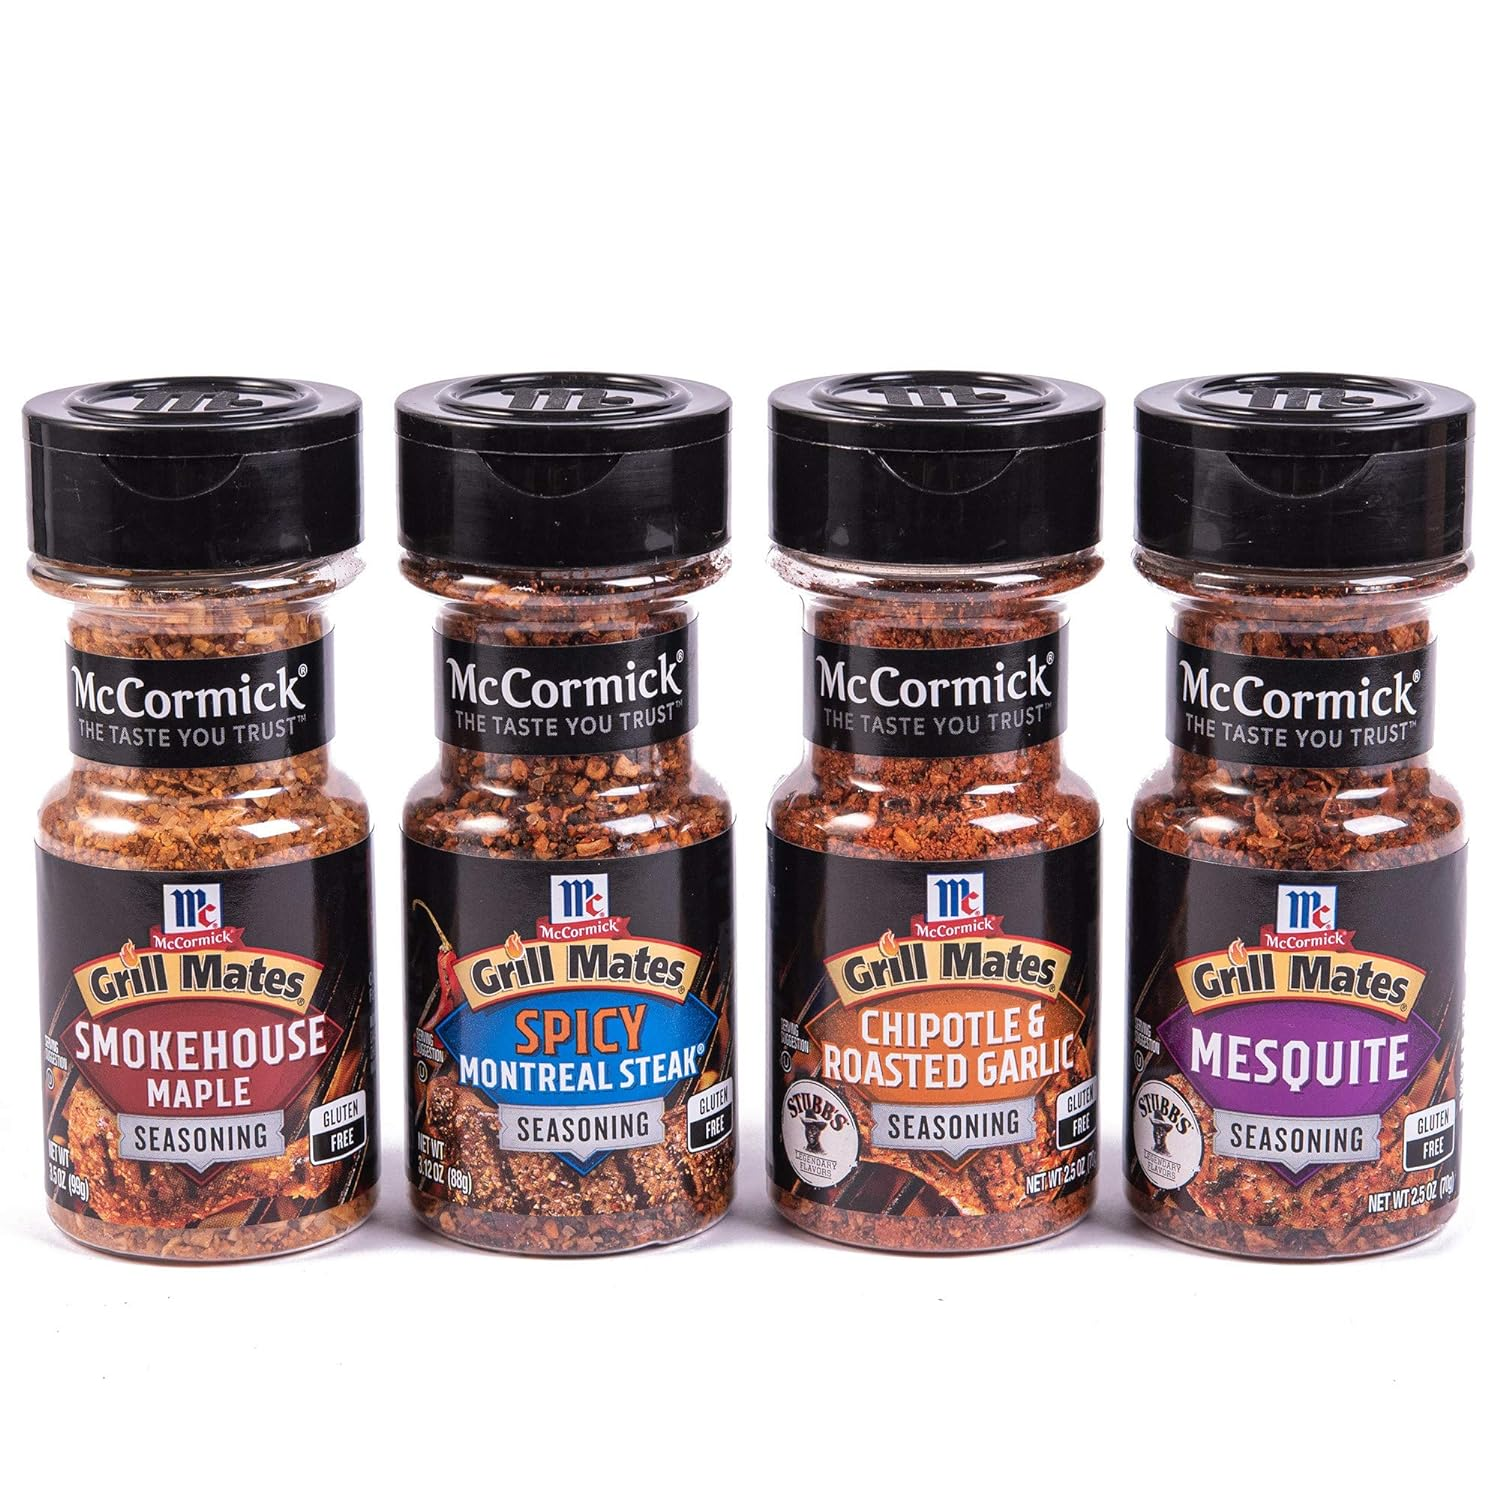 McCormick Grill Mates Unique Blends Grilling Variety Pack (Chipotle & Roasted Garlic, Mesquite, Spicy Montreal Steak, Smokehouse Maple), 4 Count $8.34